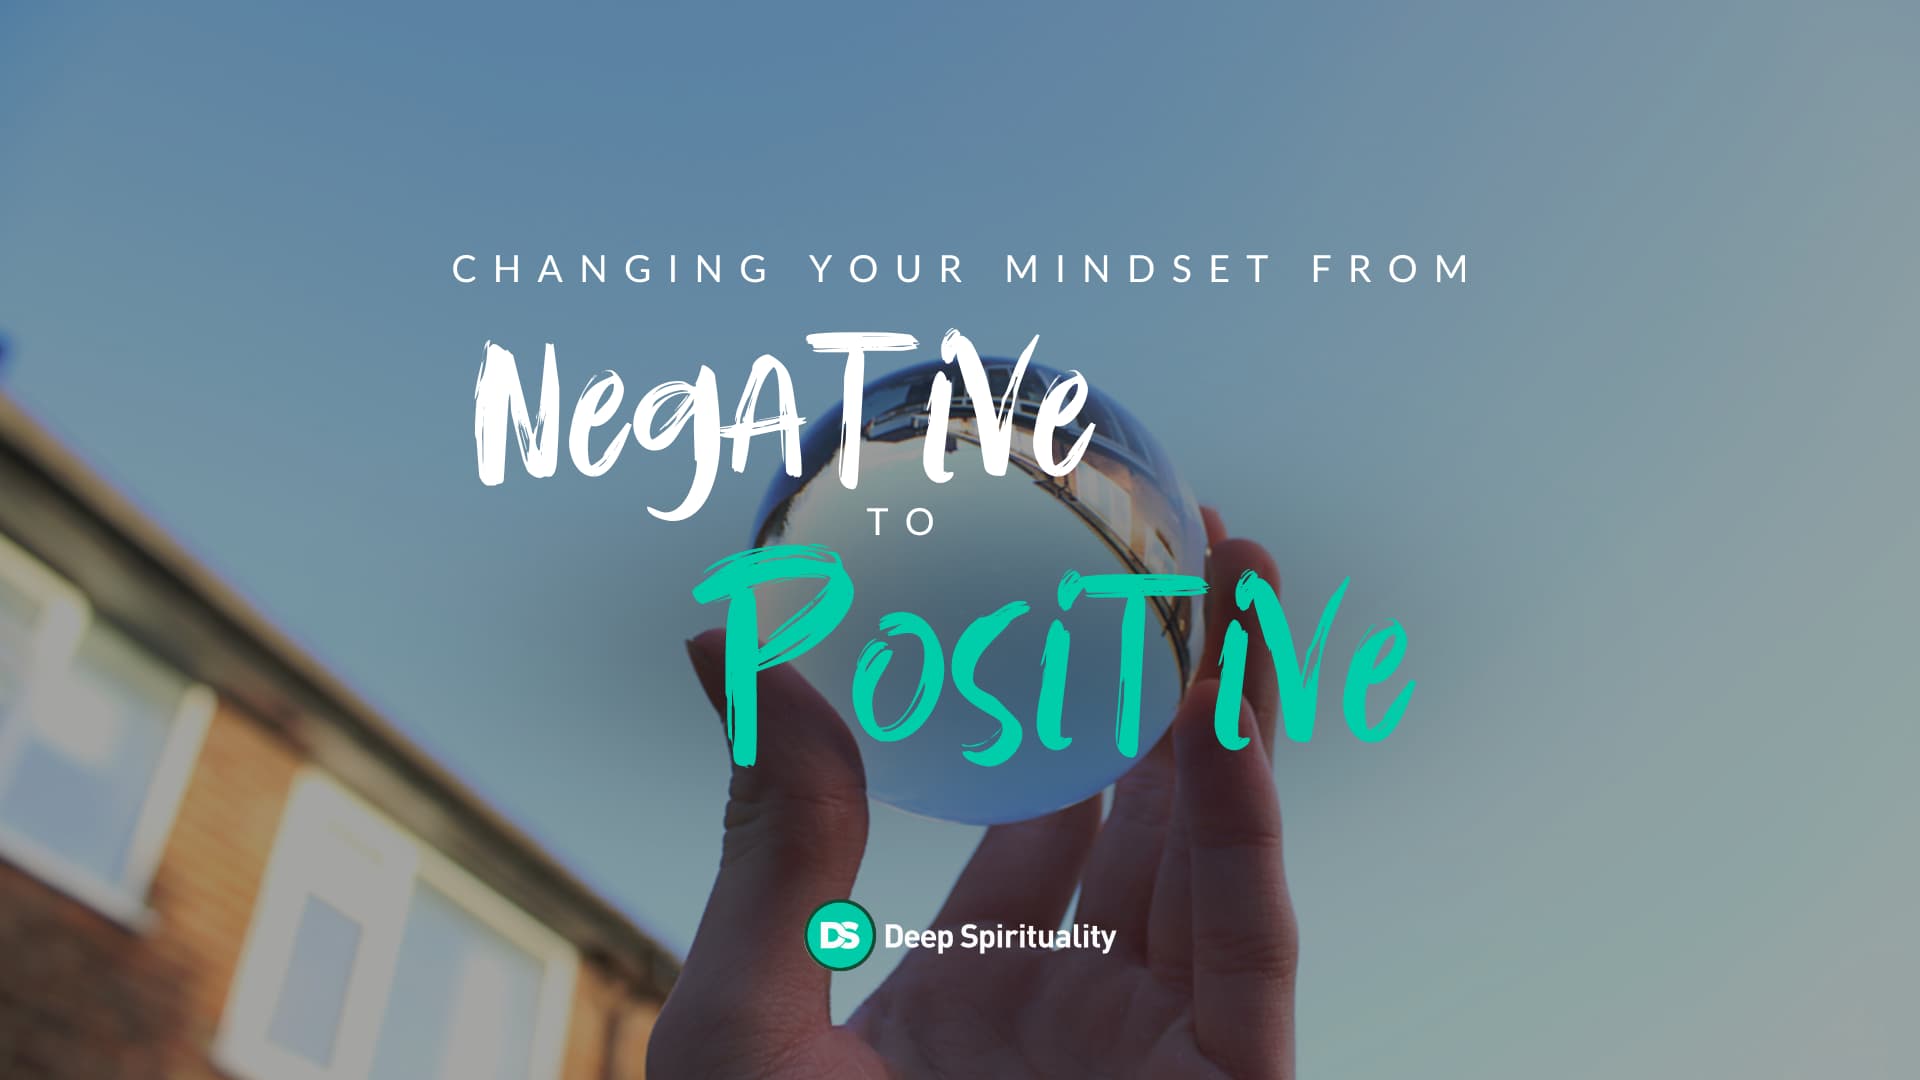 Changing Your Mindset From Negative to Positive  5